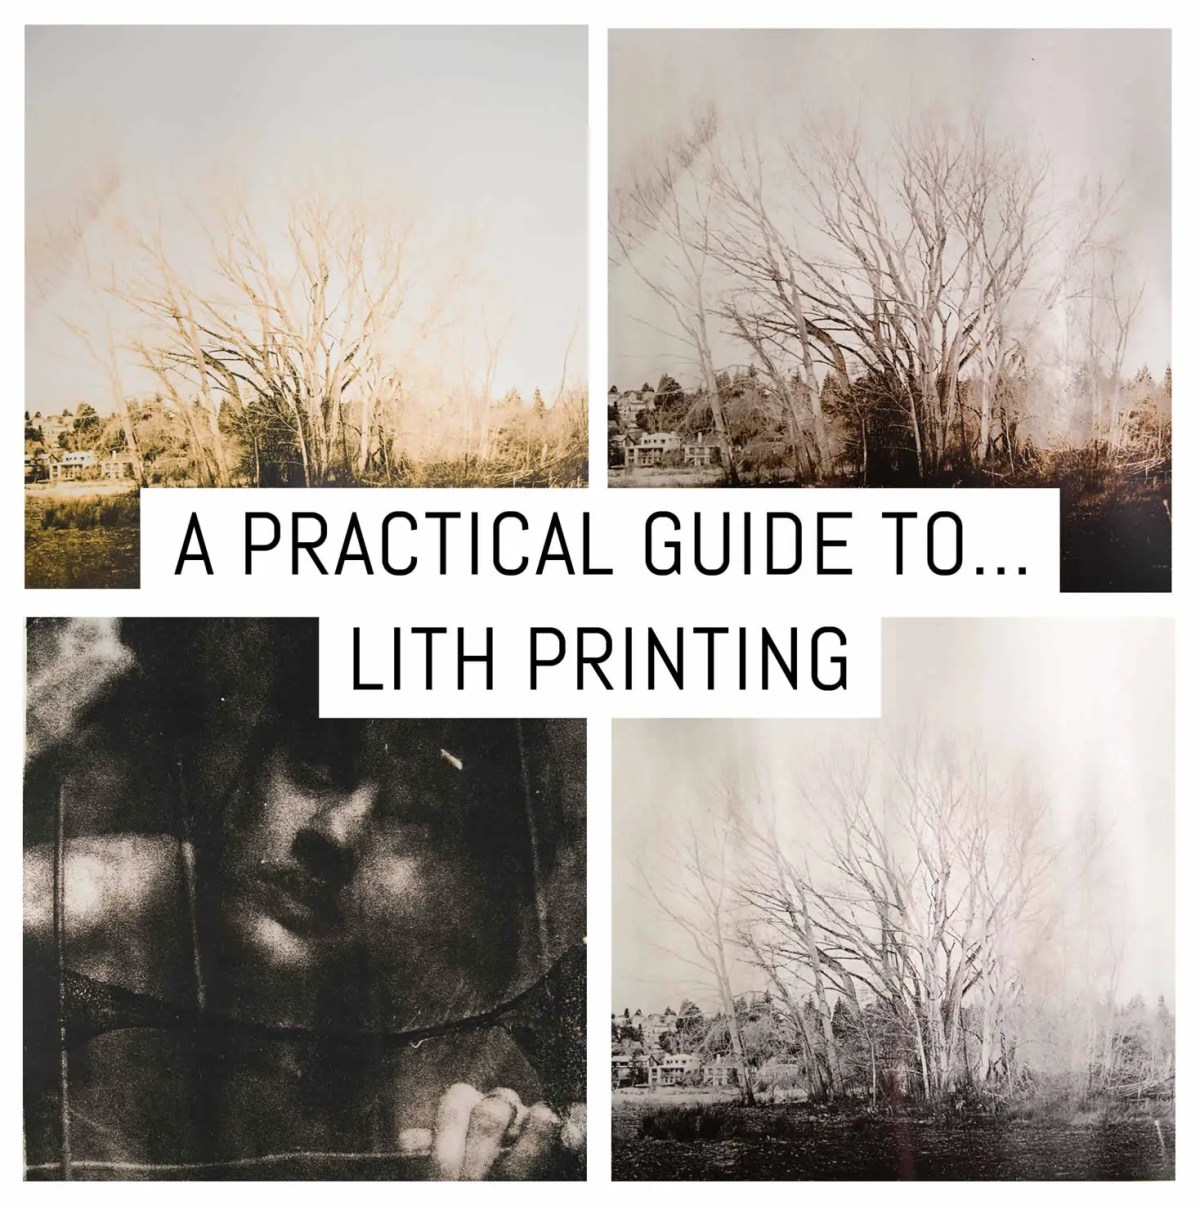 Cover: A practical guide to lith printing